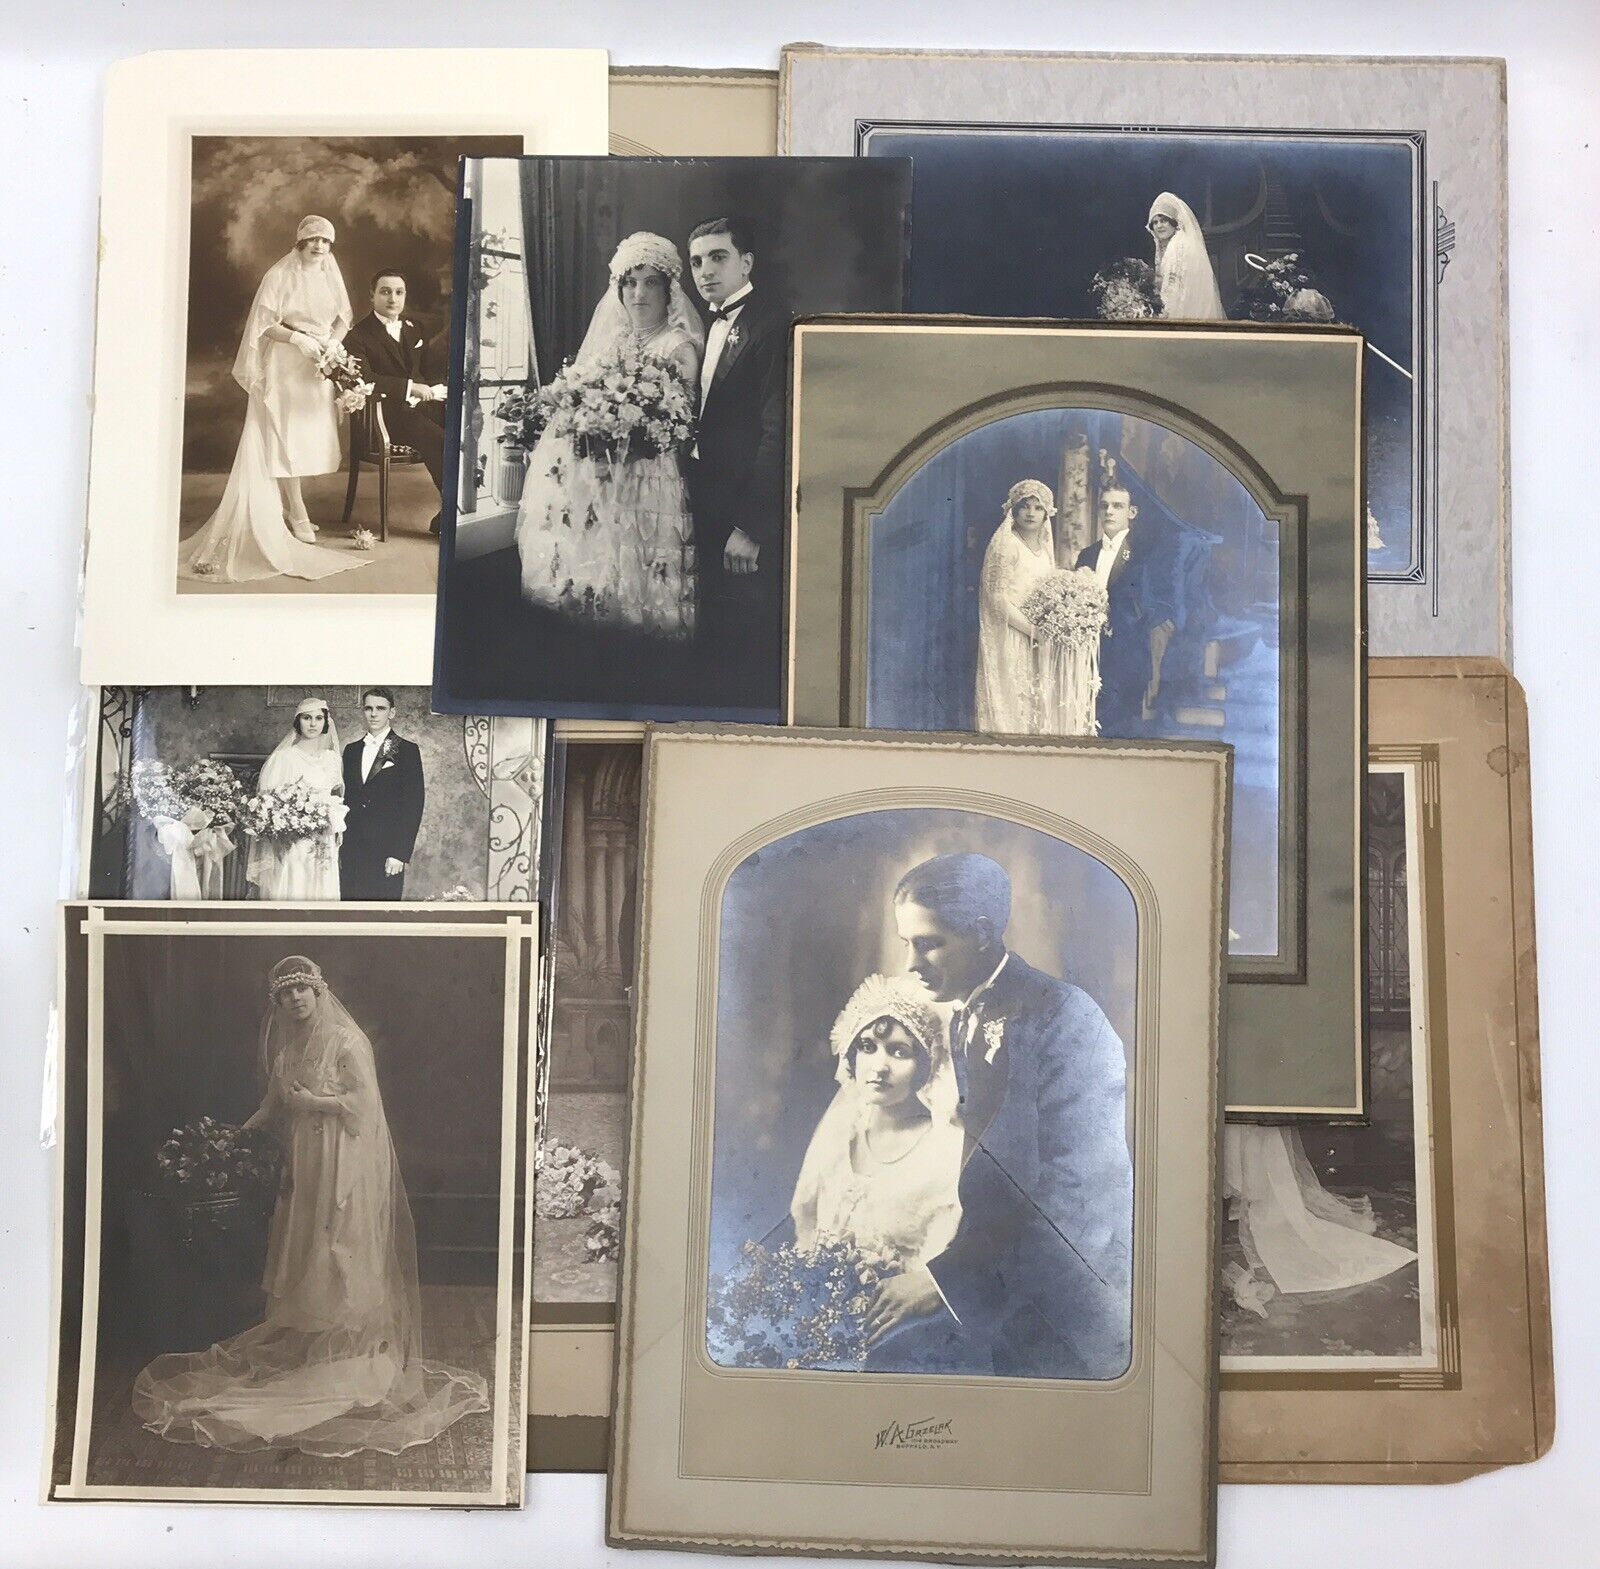 Lot of 10 Antique Large Cabinet Card / Photographs; Bride & Groom Wedding Photos